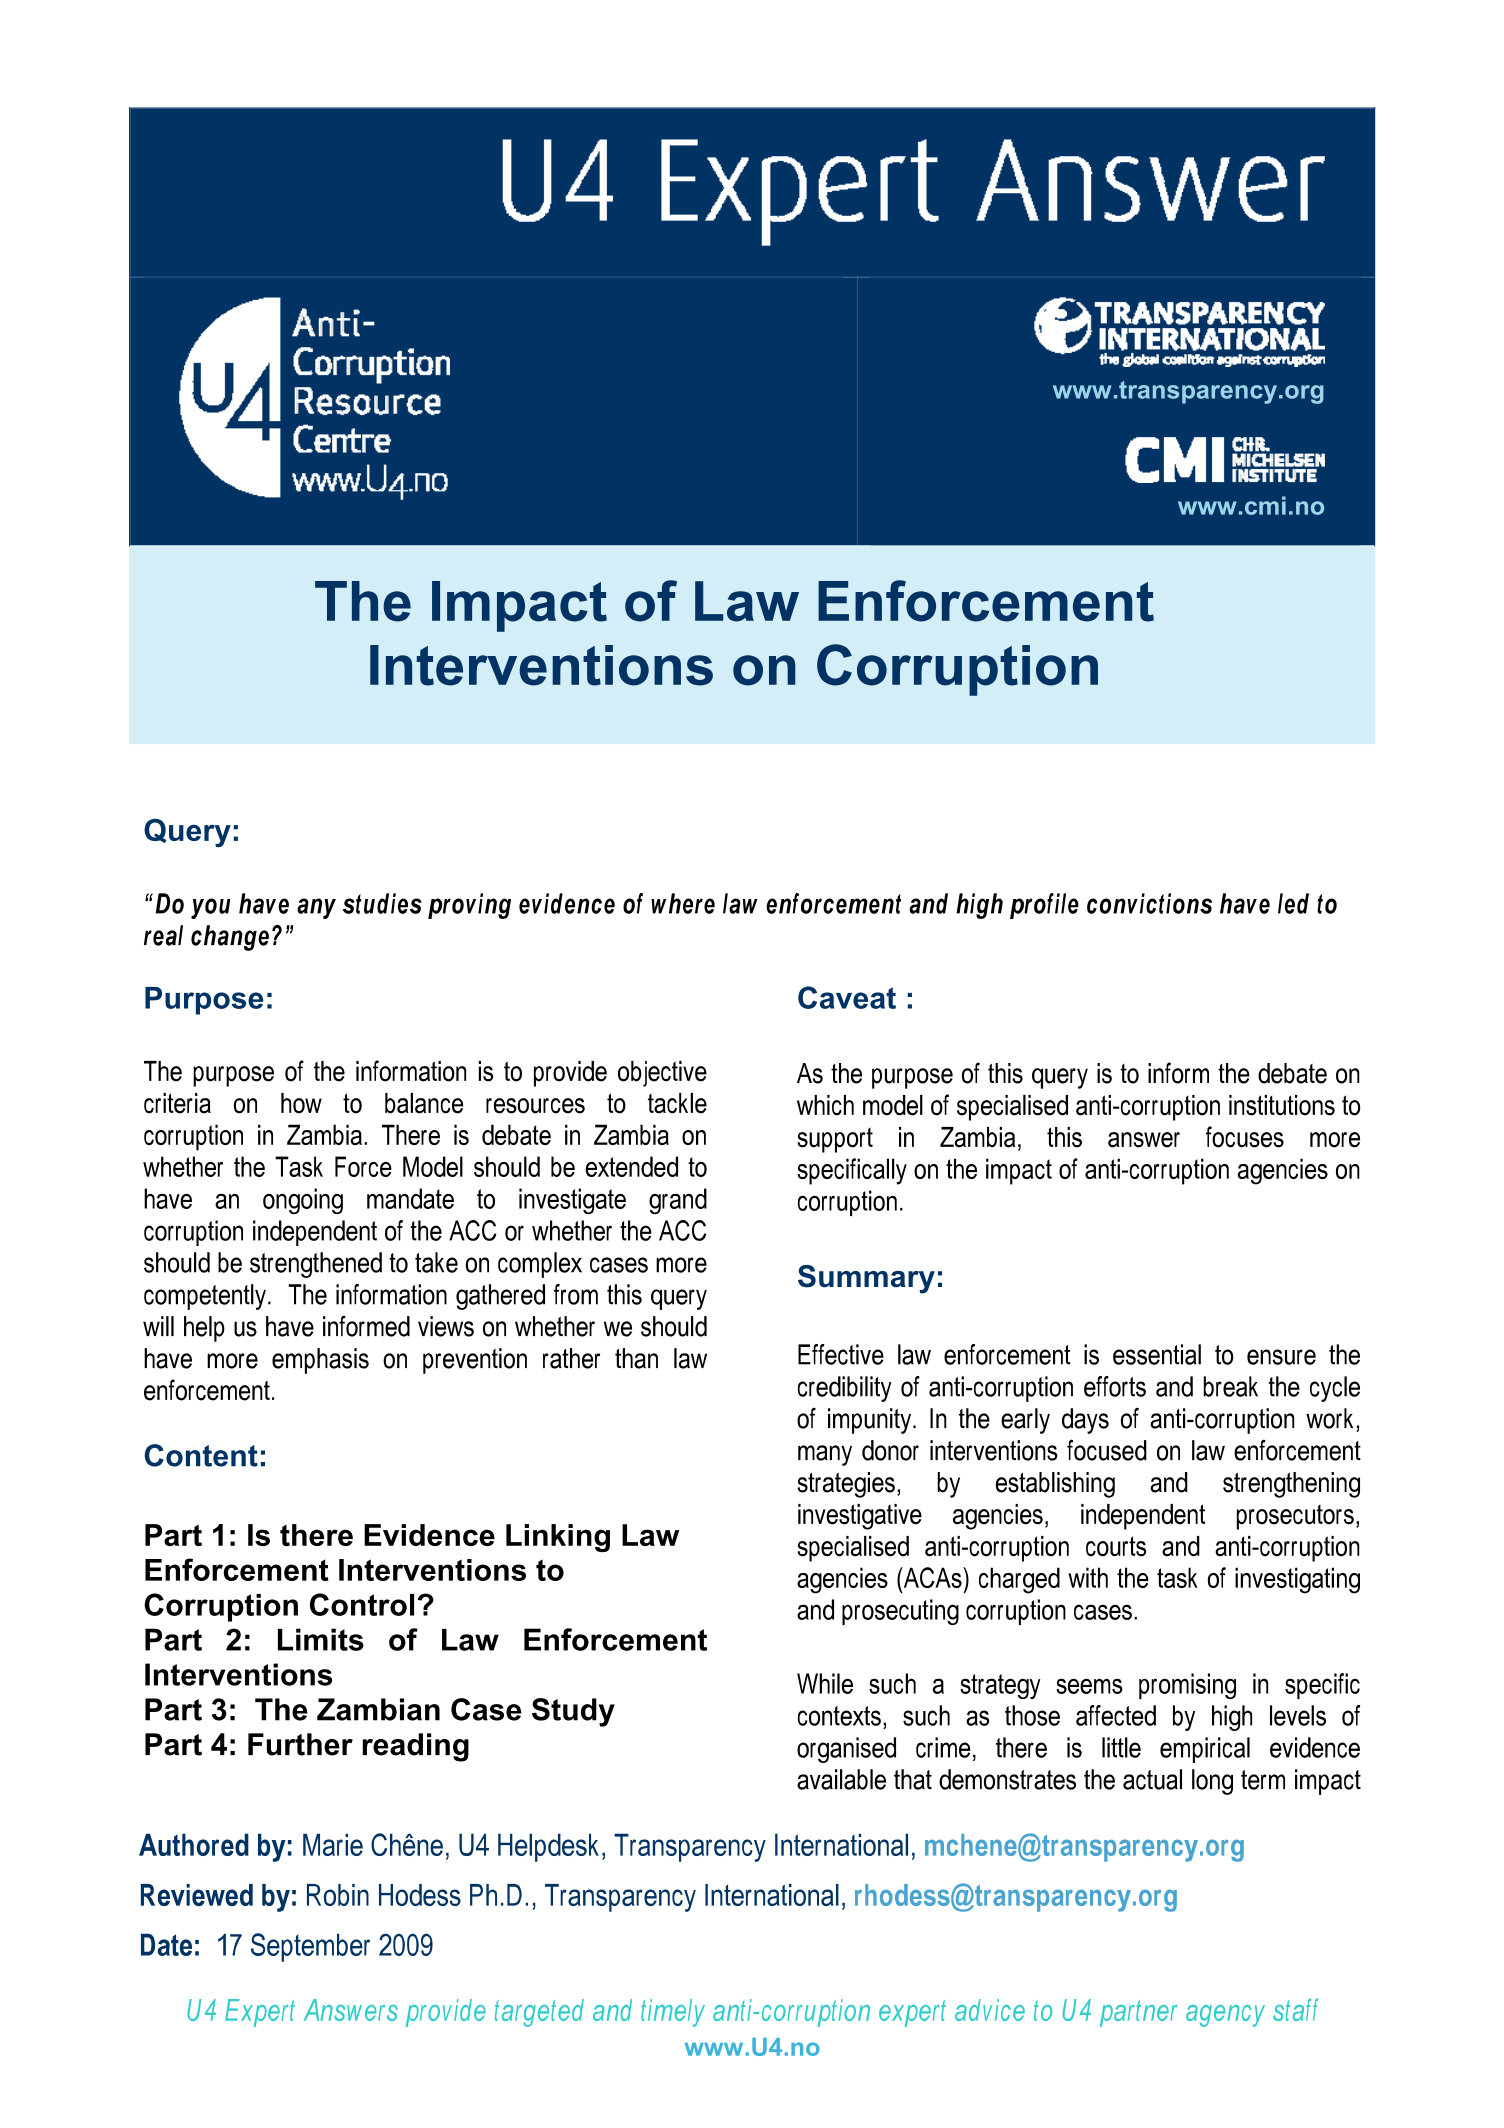 Impact of law enforcement interventions on corruption